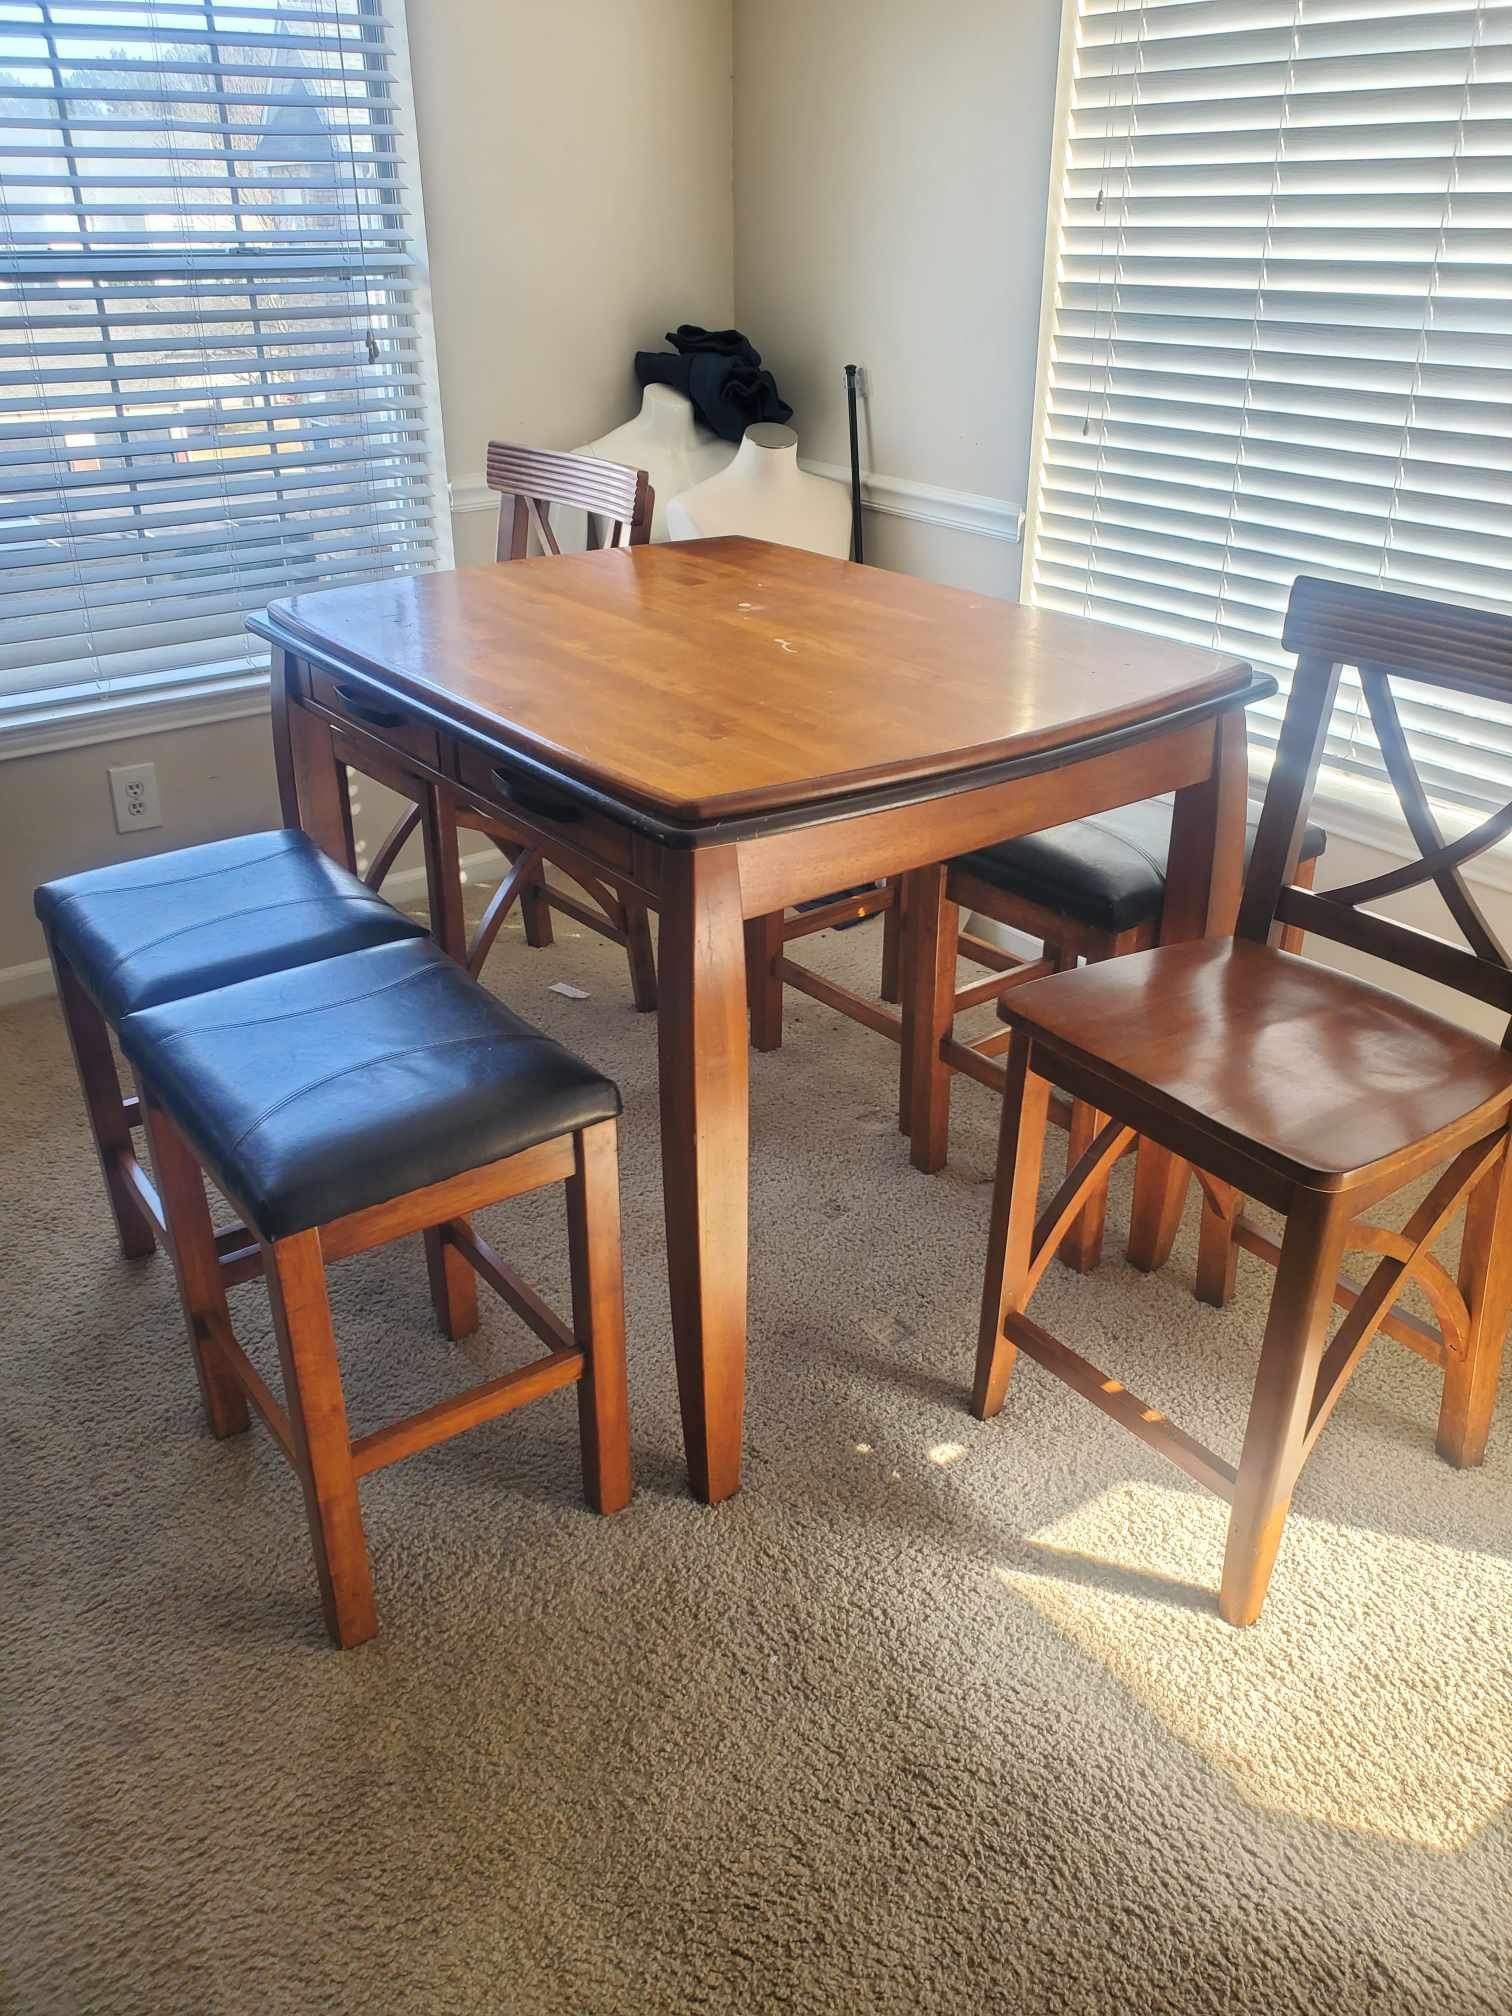 Dining table - sits 6